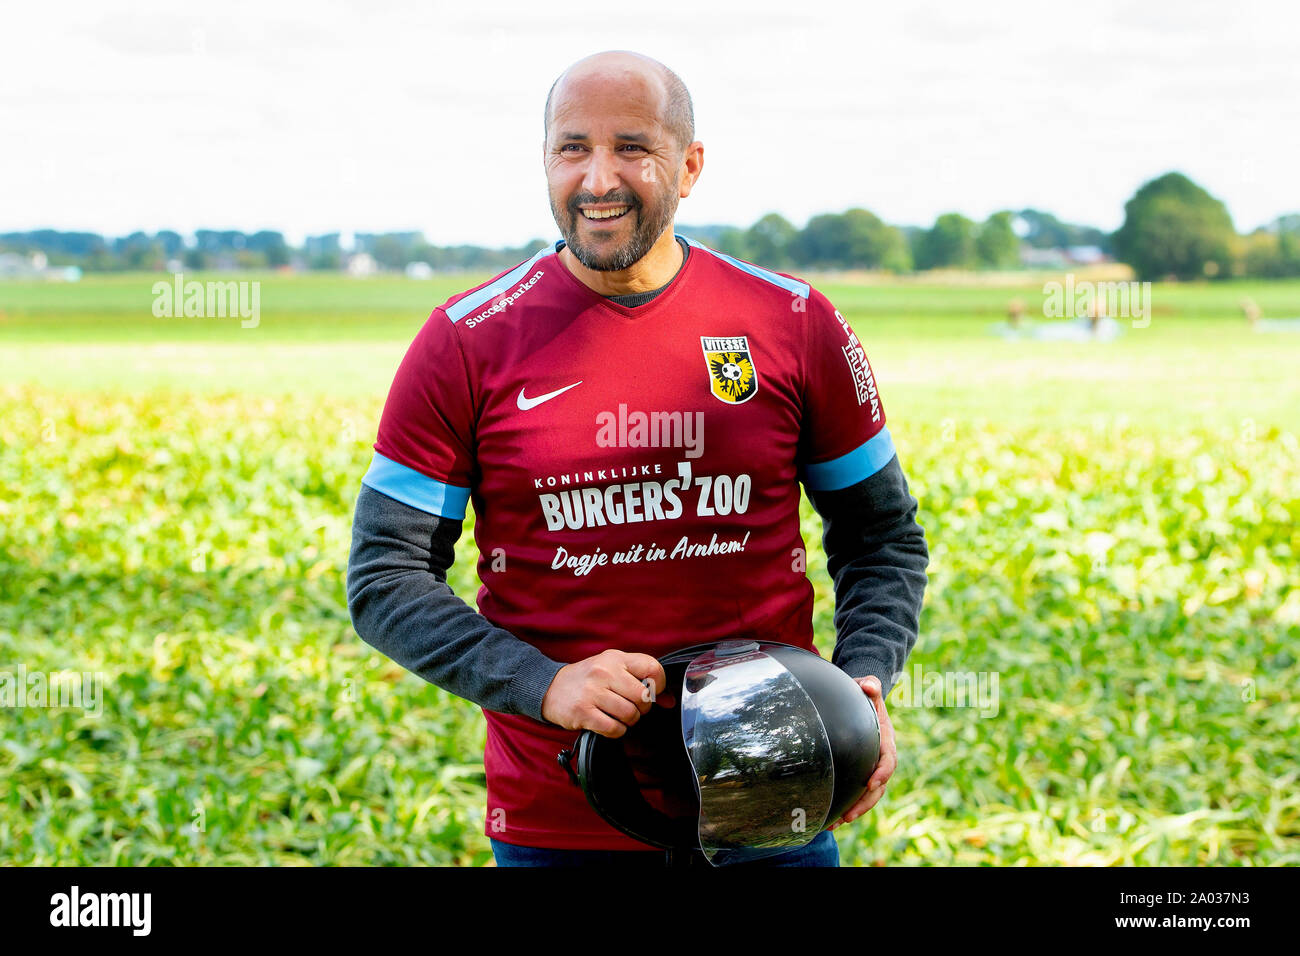 Groesbeek, Nederland. 19th Sep, 2019. GROESBEEK 19-09-2019, dutchnews, mayor of Arnhem Ahmed Marcouch after his parachute jump in Vitesse Airborne jersey as part of 75th Airborne remembrance Credit: Pro Shots/Alamy Live News Stock Photo